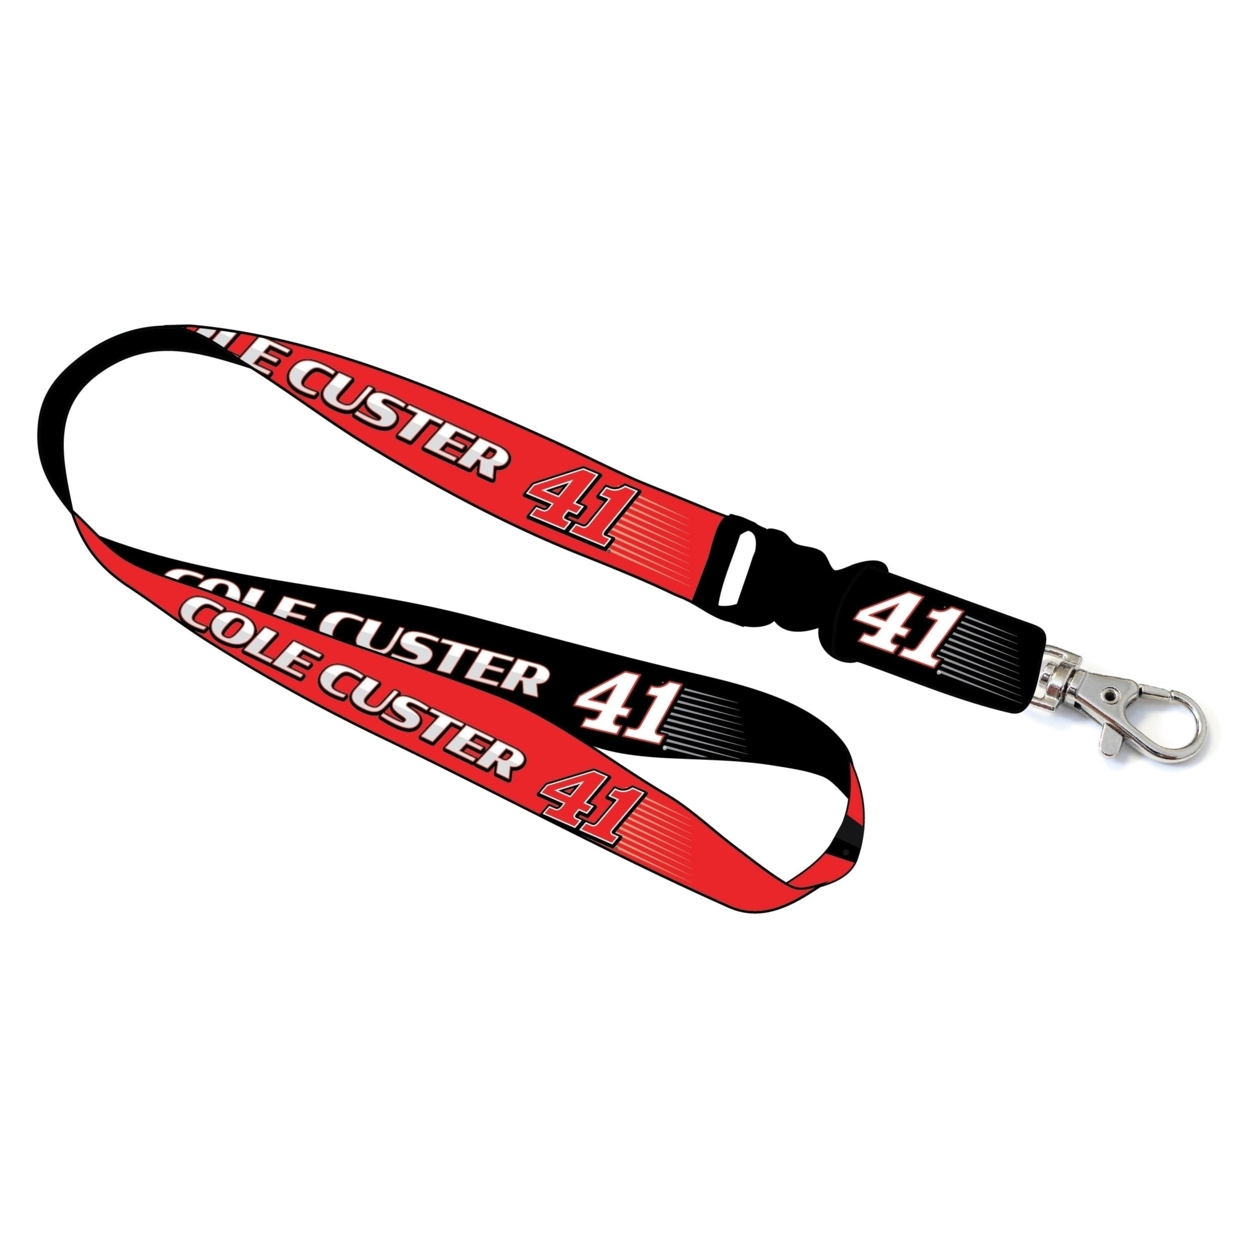 Cole Custer #41 NASCAR Cup Series Lanyard New For 2021